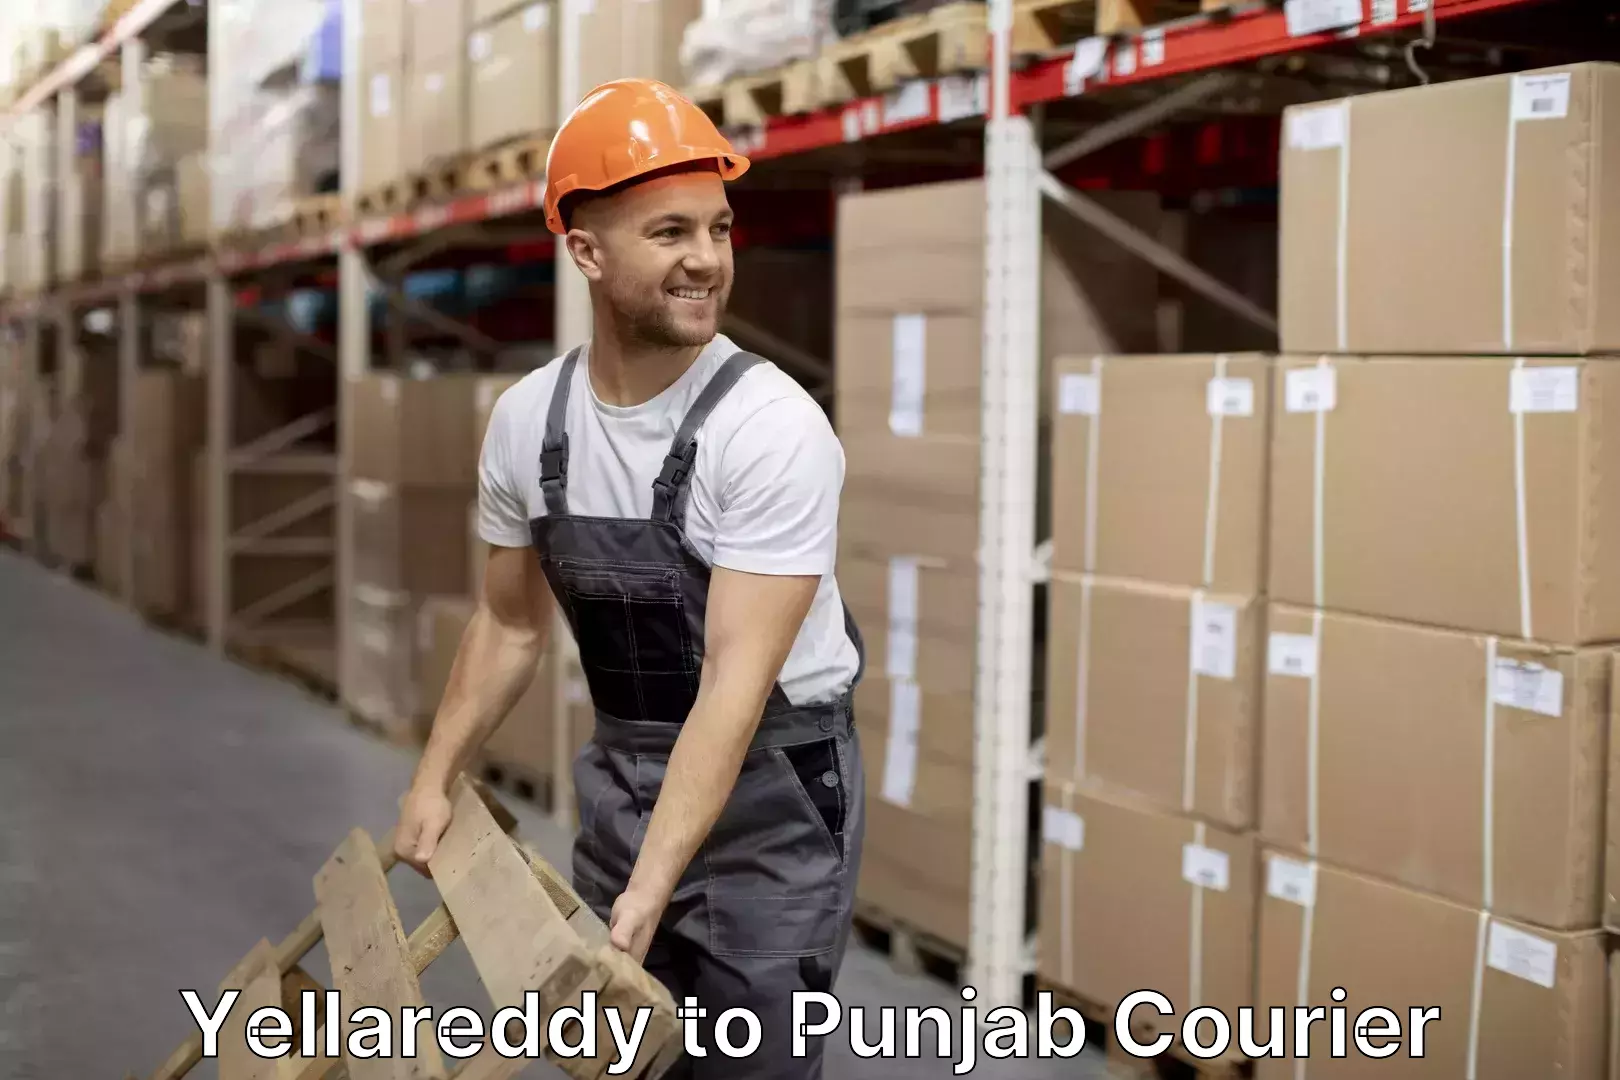 Budget-friendly movers in Yellareddy to Punjab